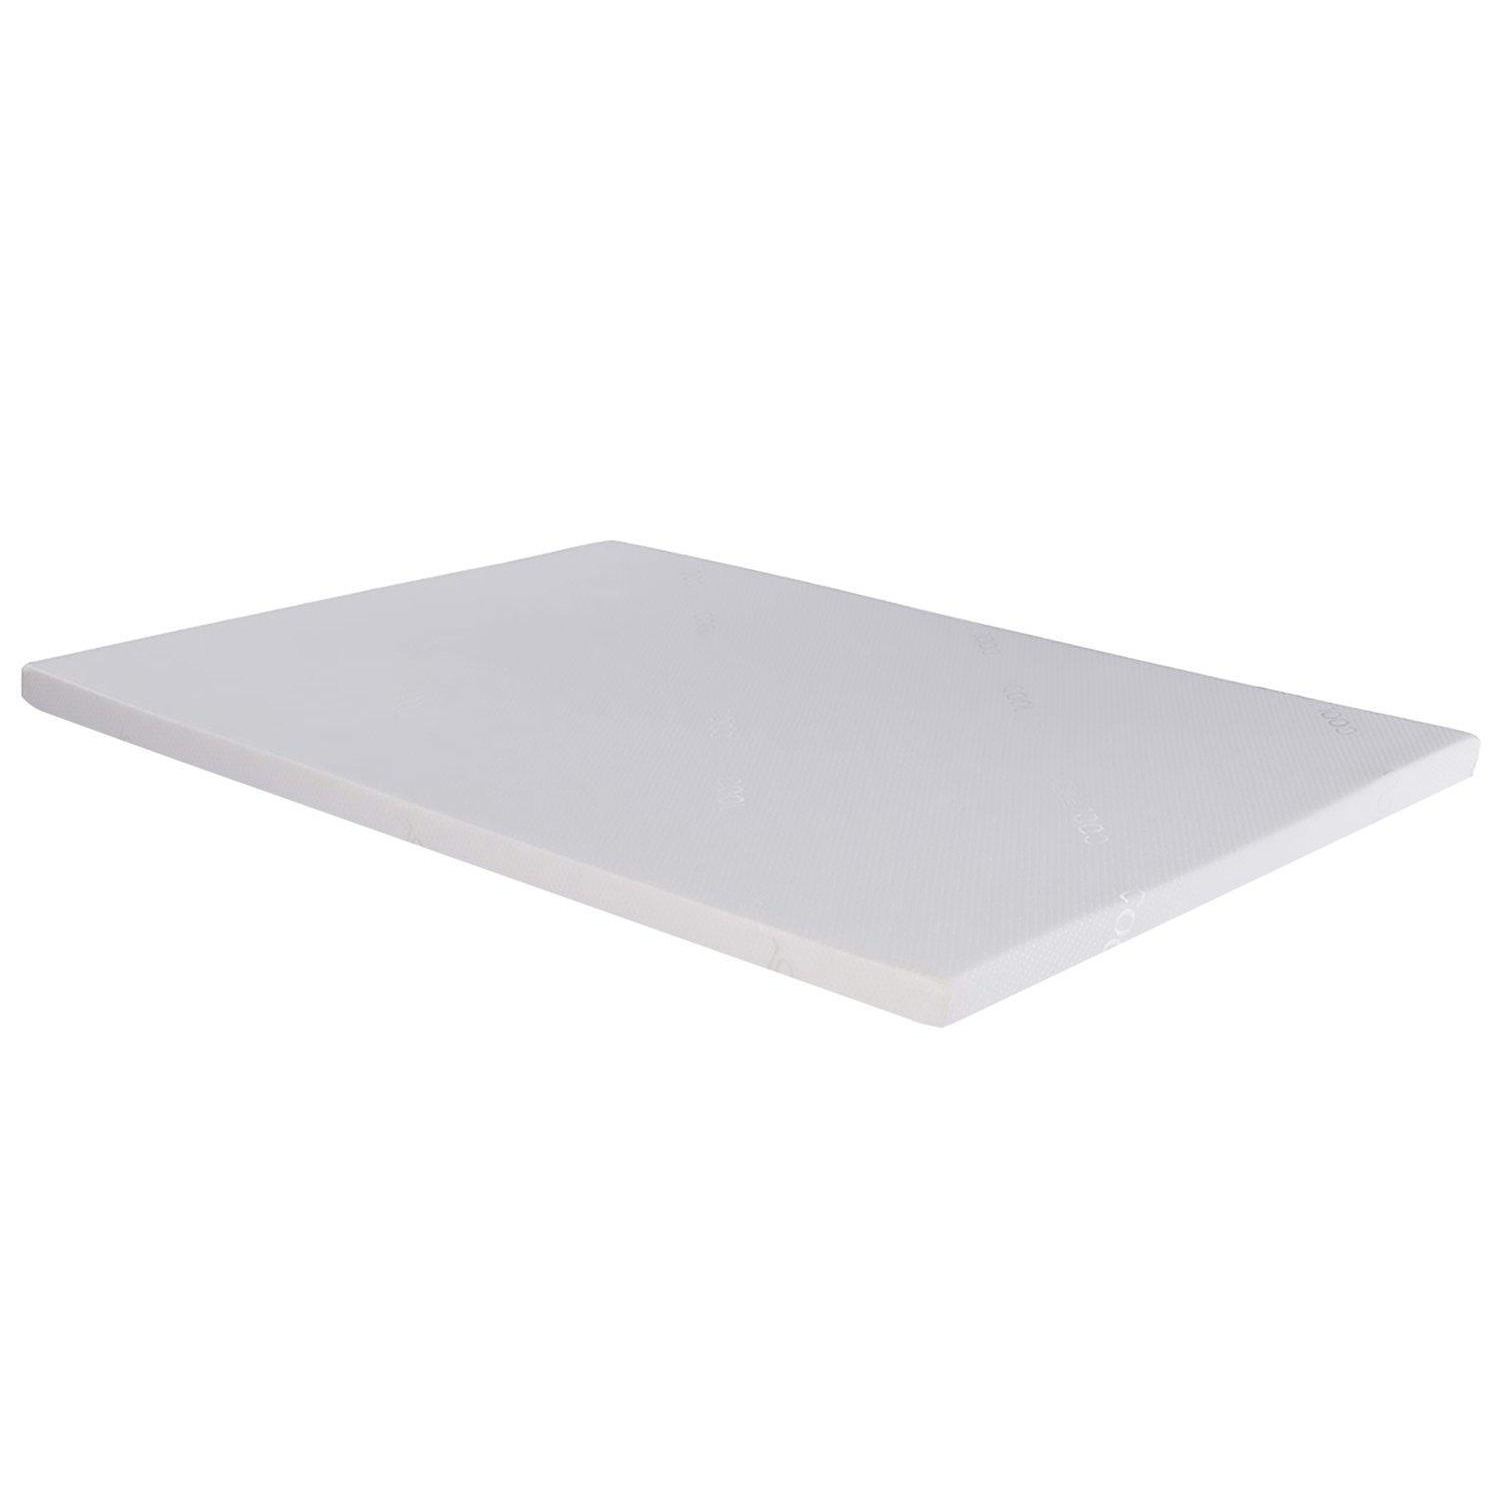 Memory Foam Mattress Topper 5000, 2 inch with Cover - image 1